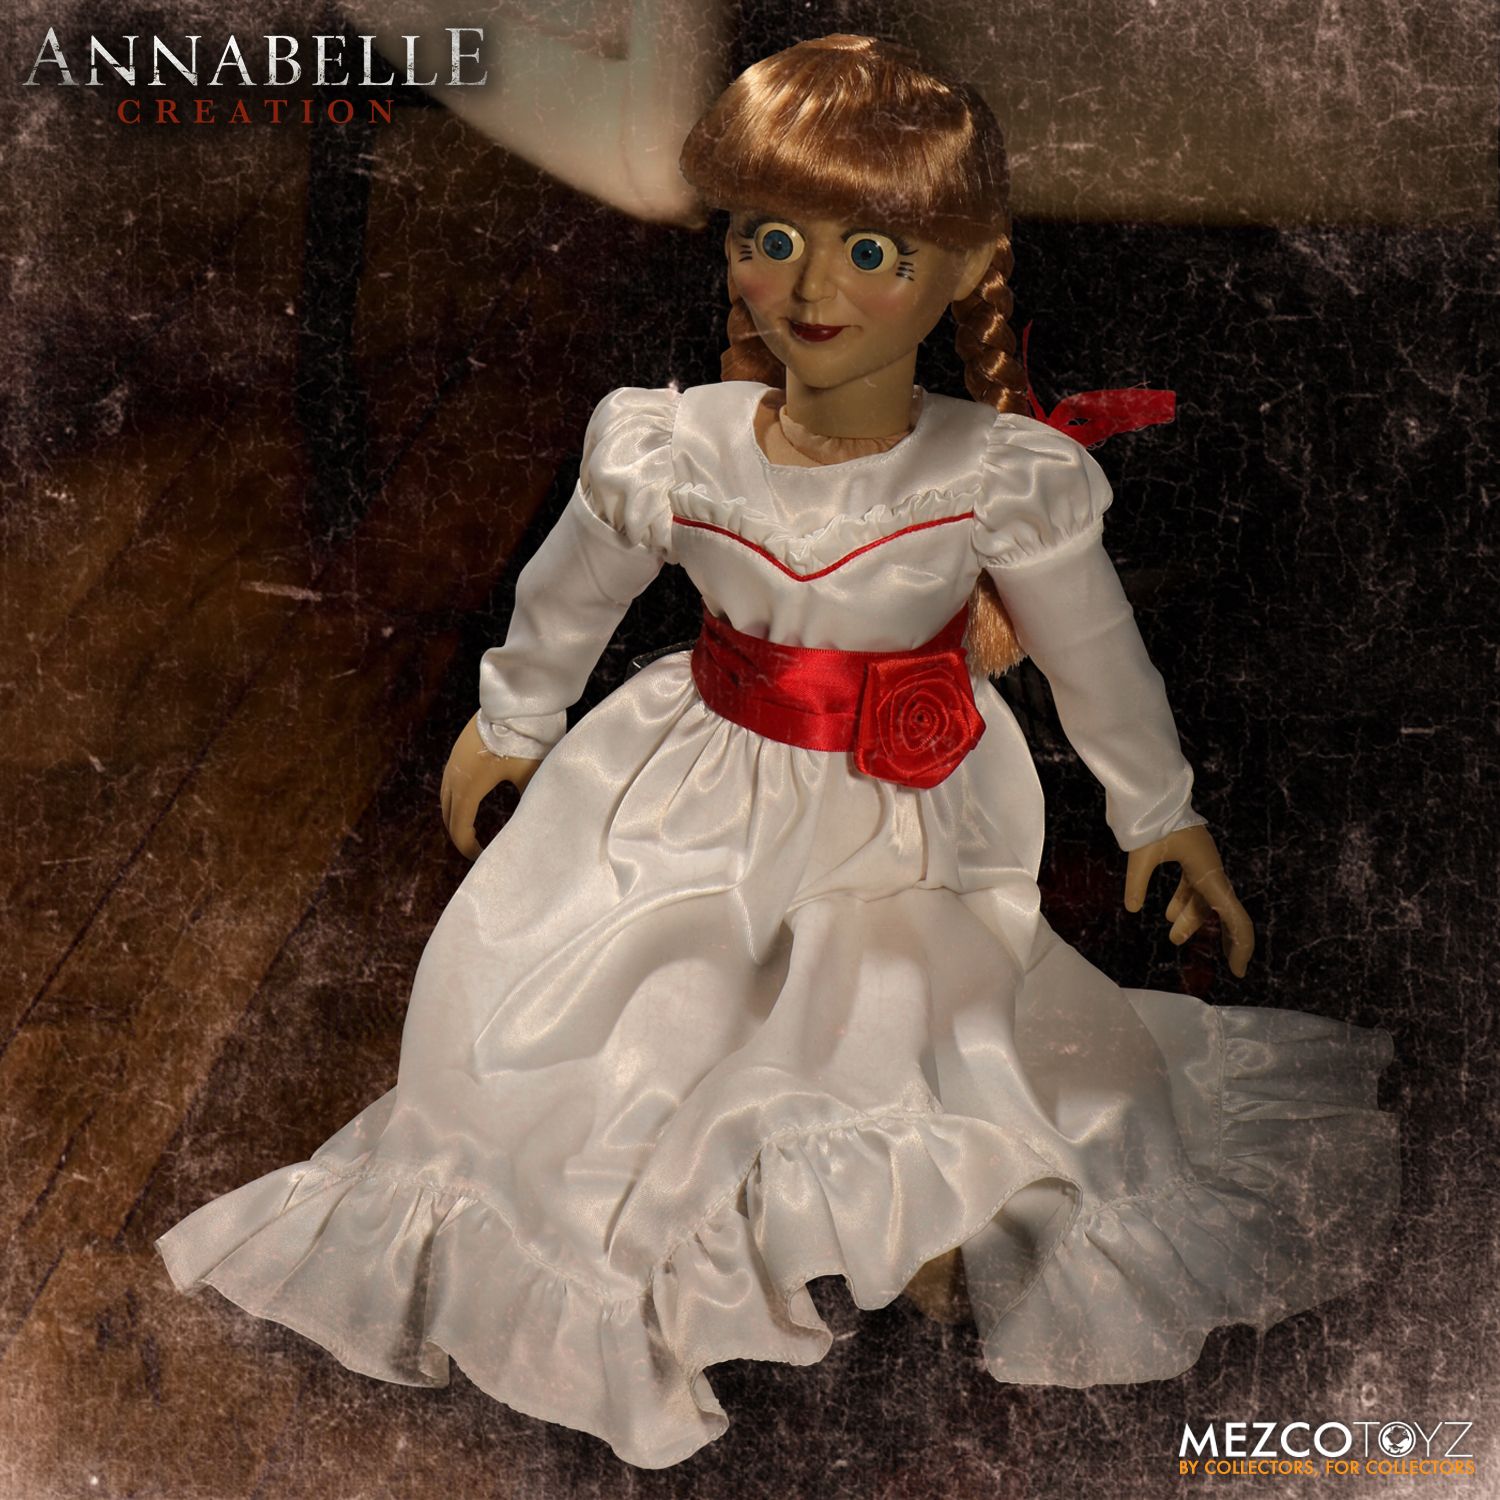 annabelle the doll for sale